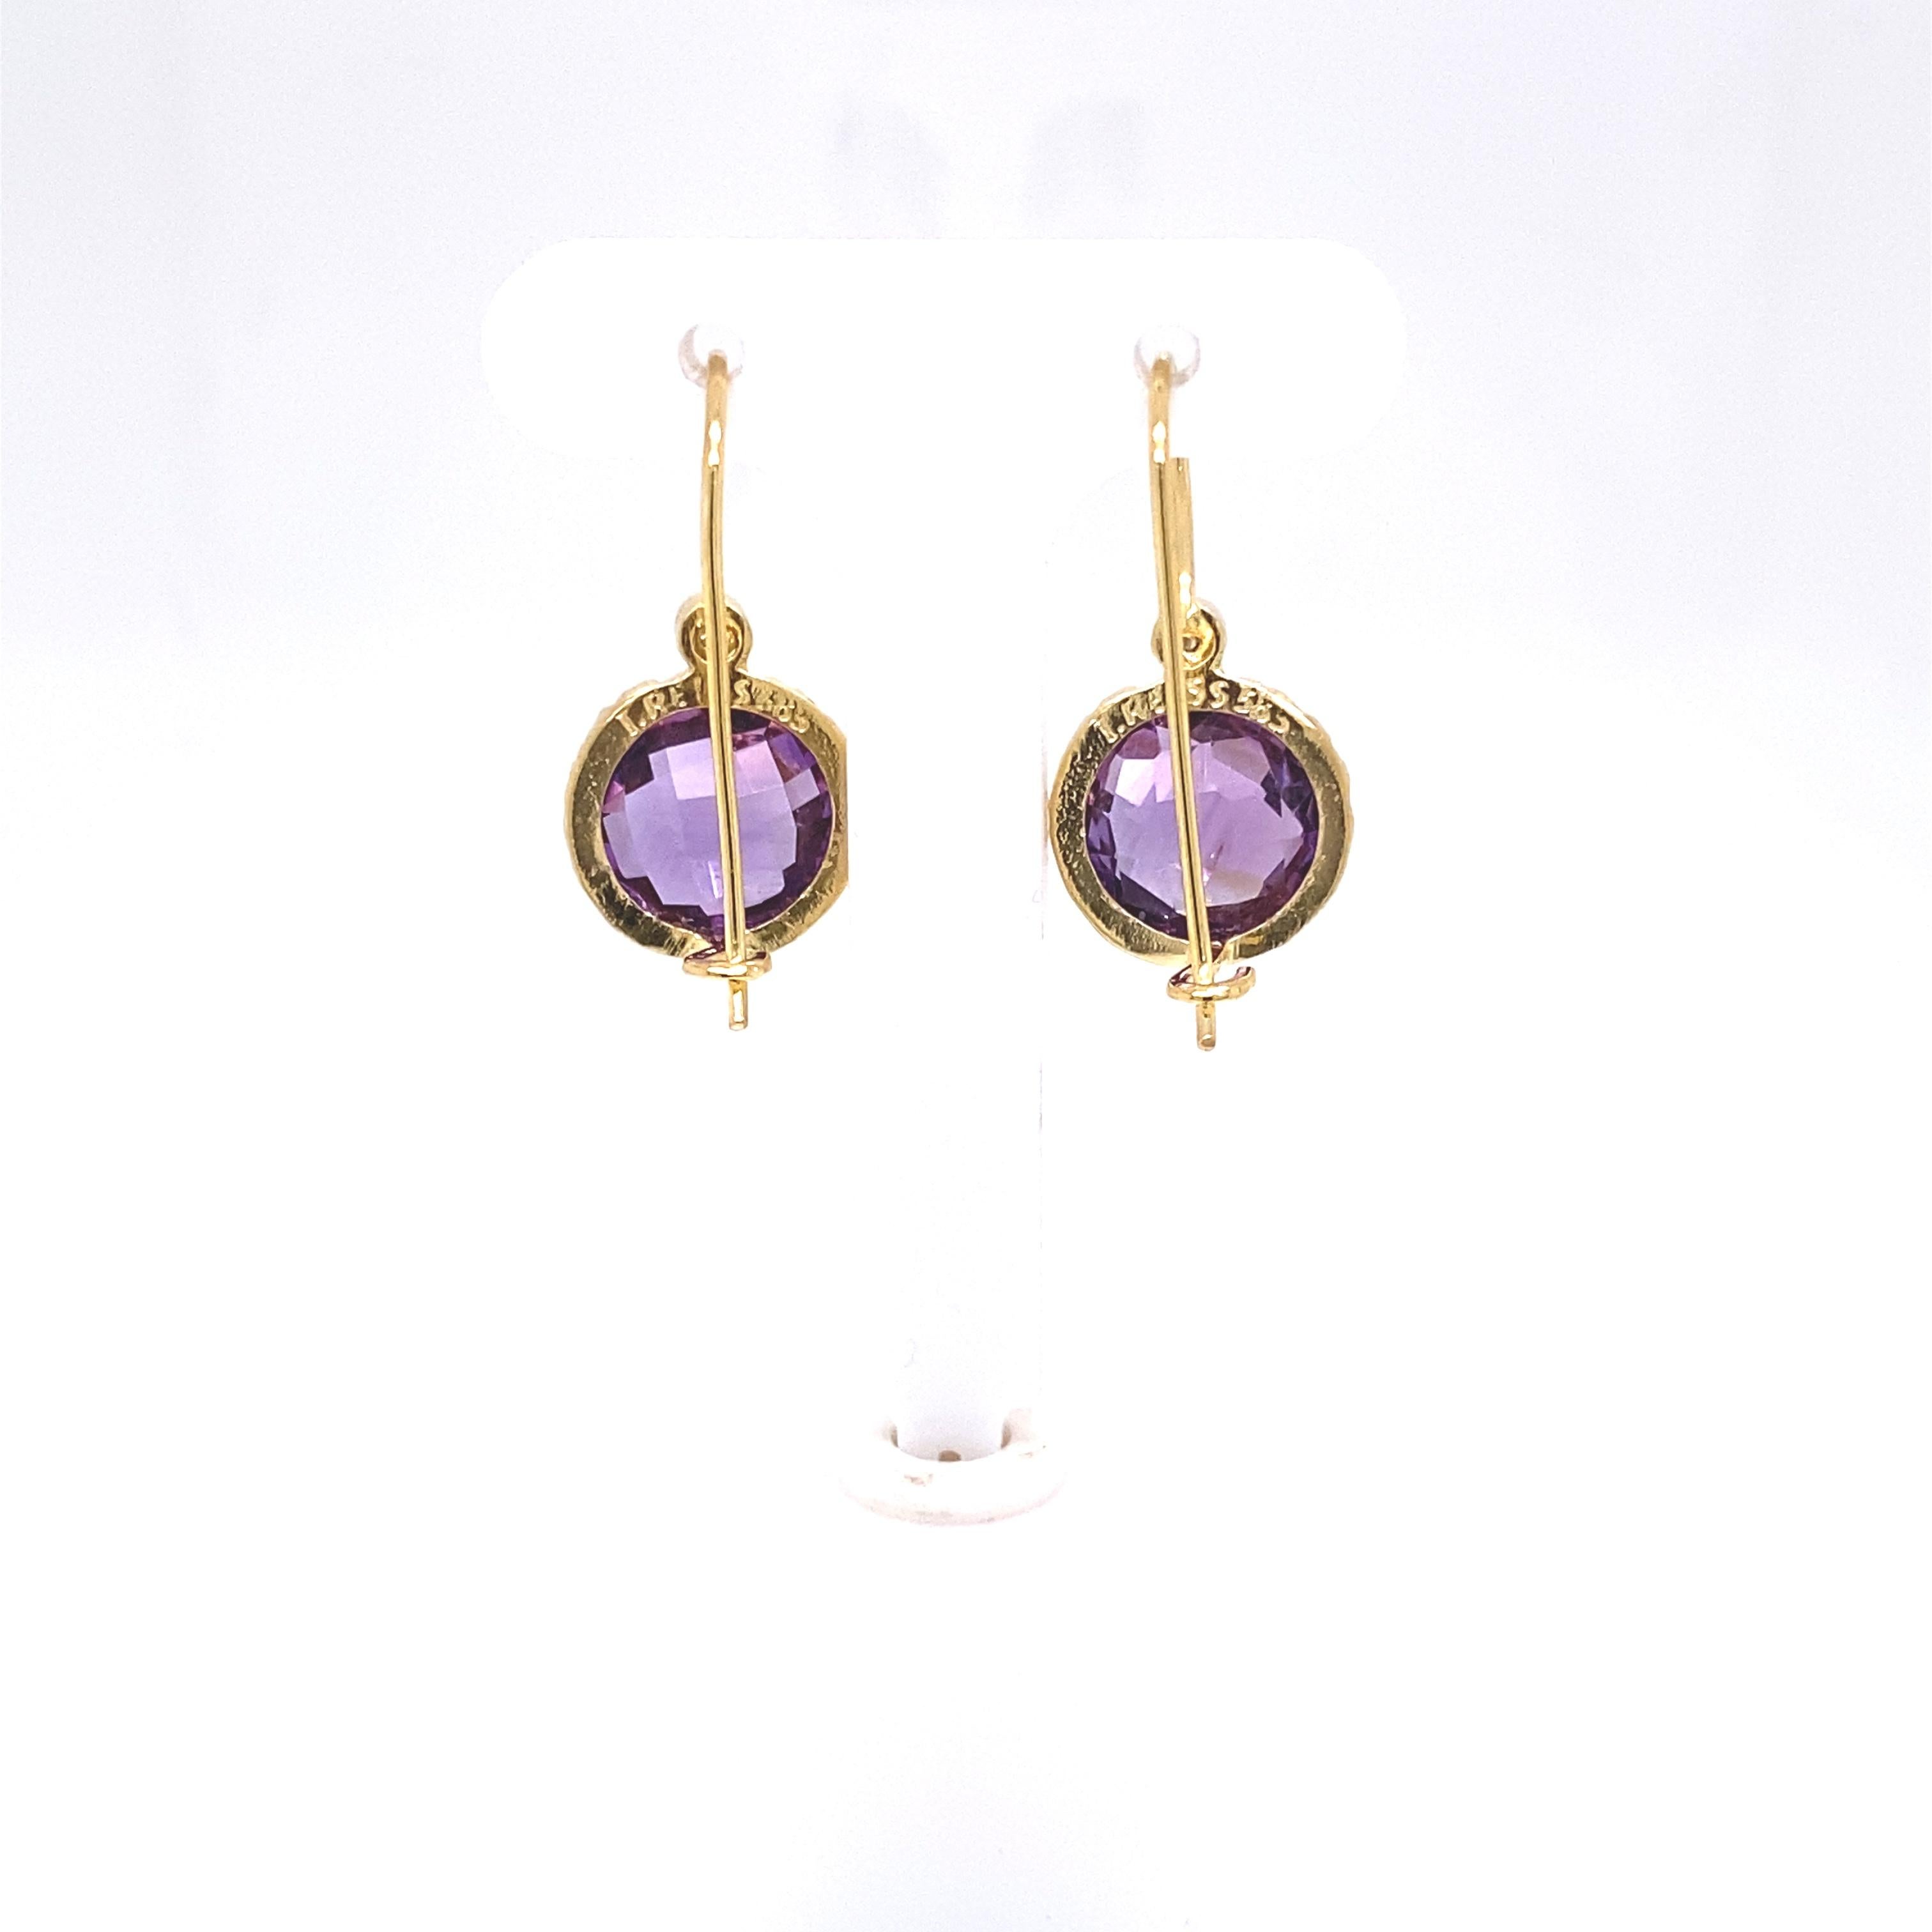 14 Karat Yellow Gold Hand-Crafted Polish-Finished Drop Earrings, Centered with a 10mm Round Checkerboard-Cut Semi-Precious Amethyst Color Stone, Accented with 0.03 Carats of Bezel Set Diamonds.

